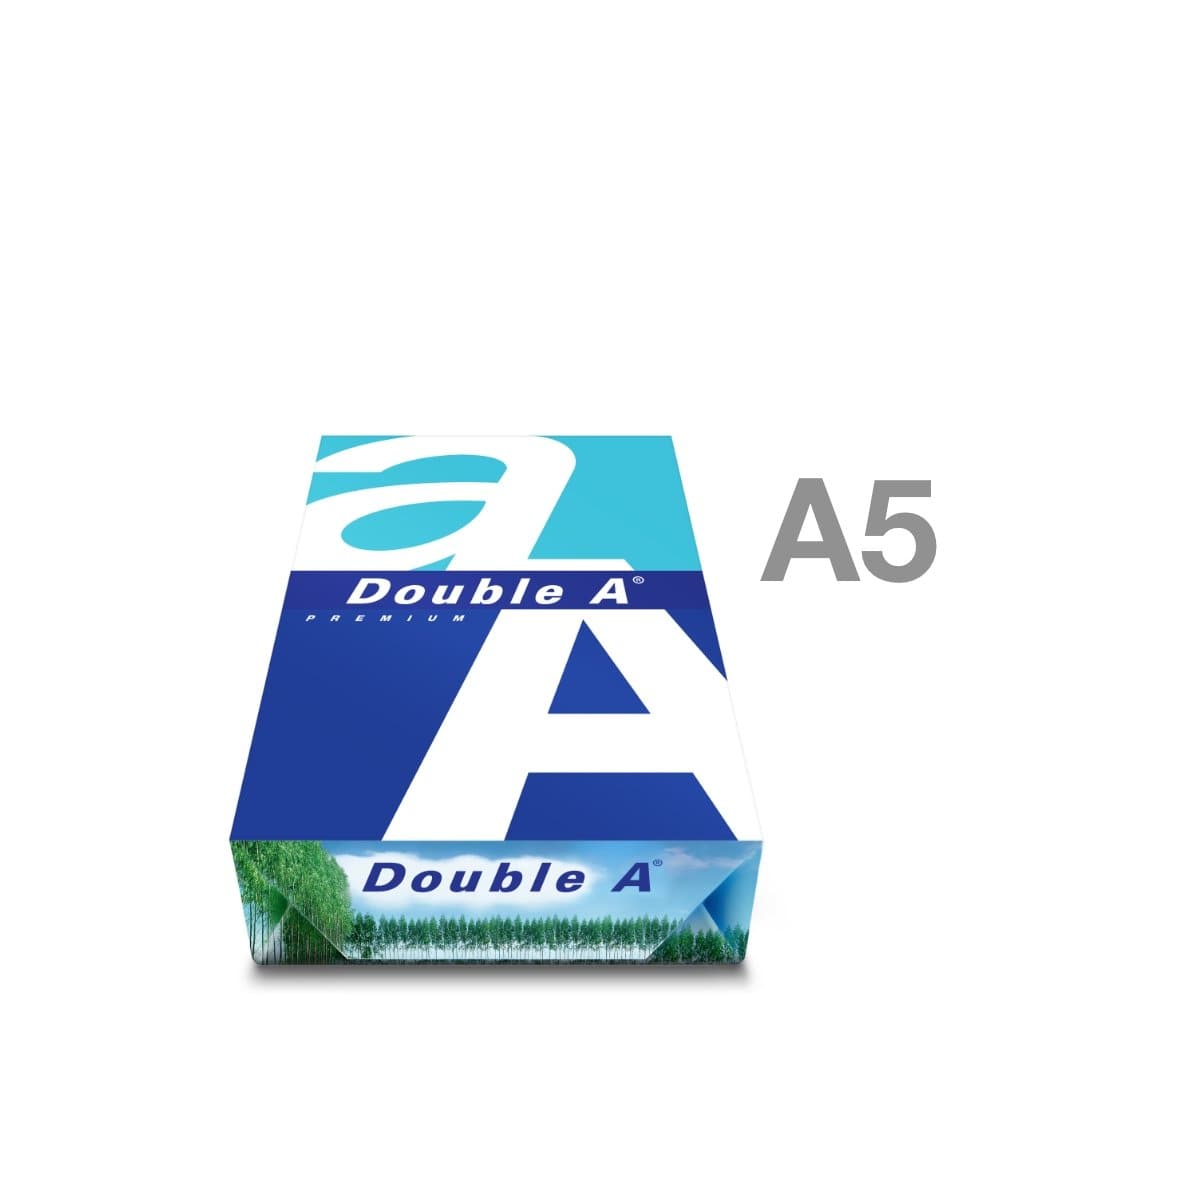 Double A Premium Paper A5, 80gsm, 500sheets/ream